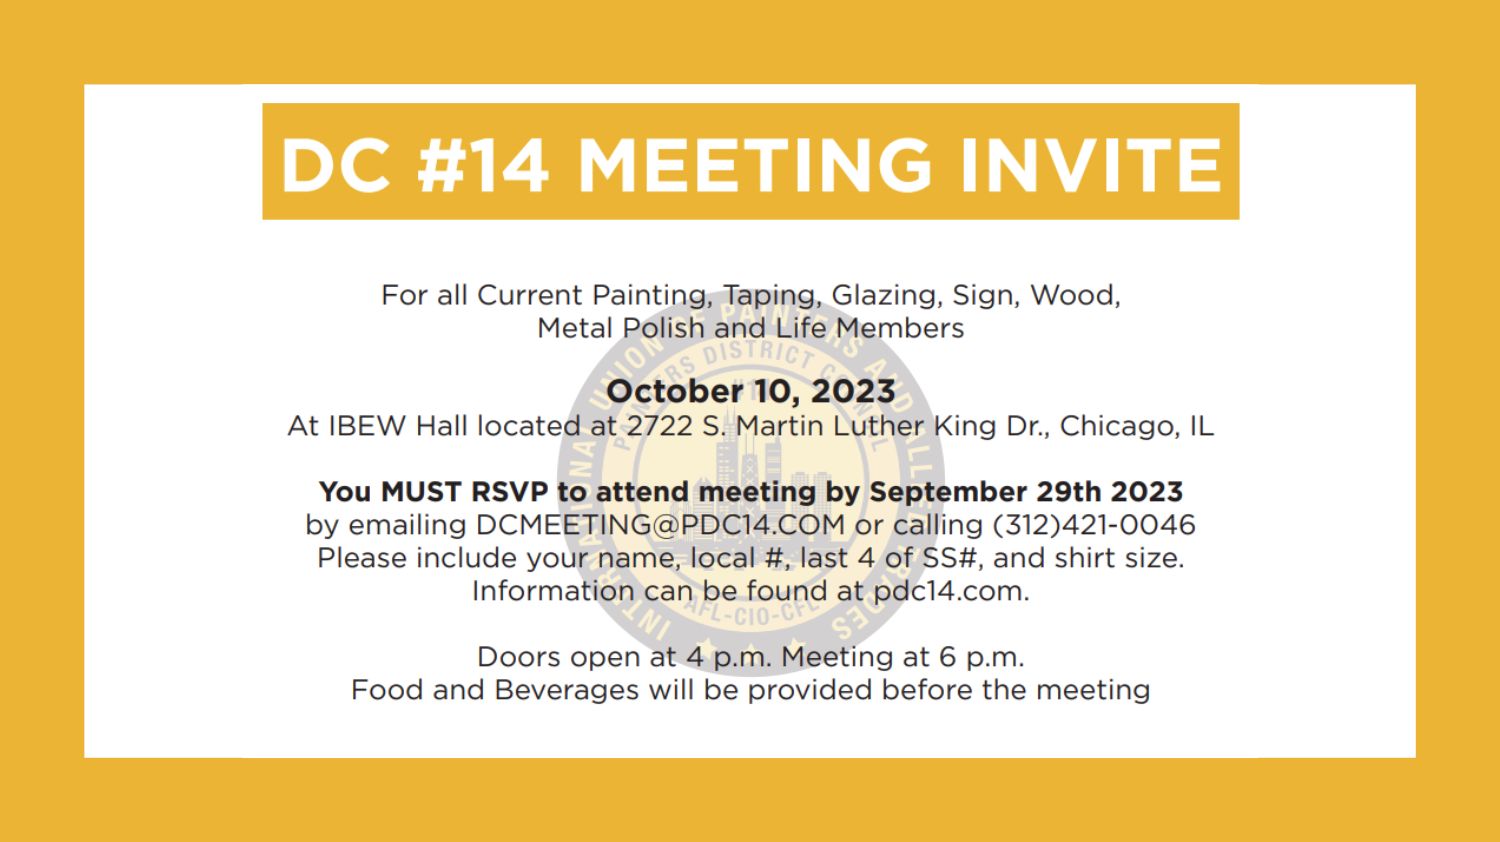 PAINTERS’ DISTRICT COUNCIL #14 MEETING INVITE